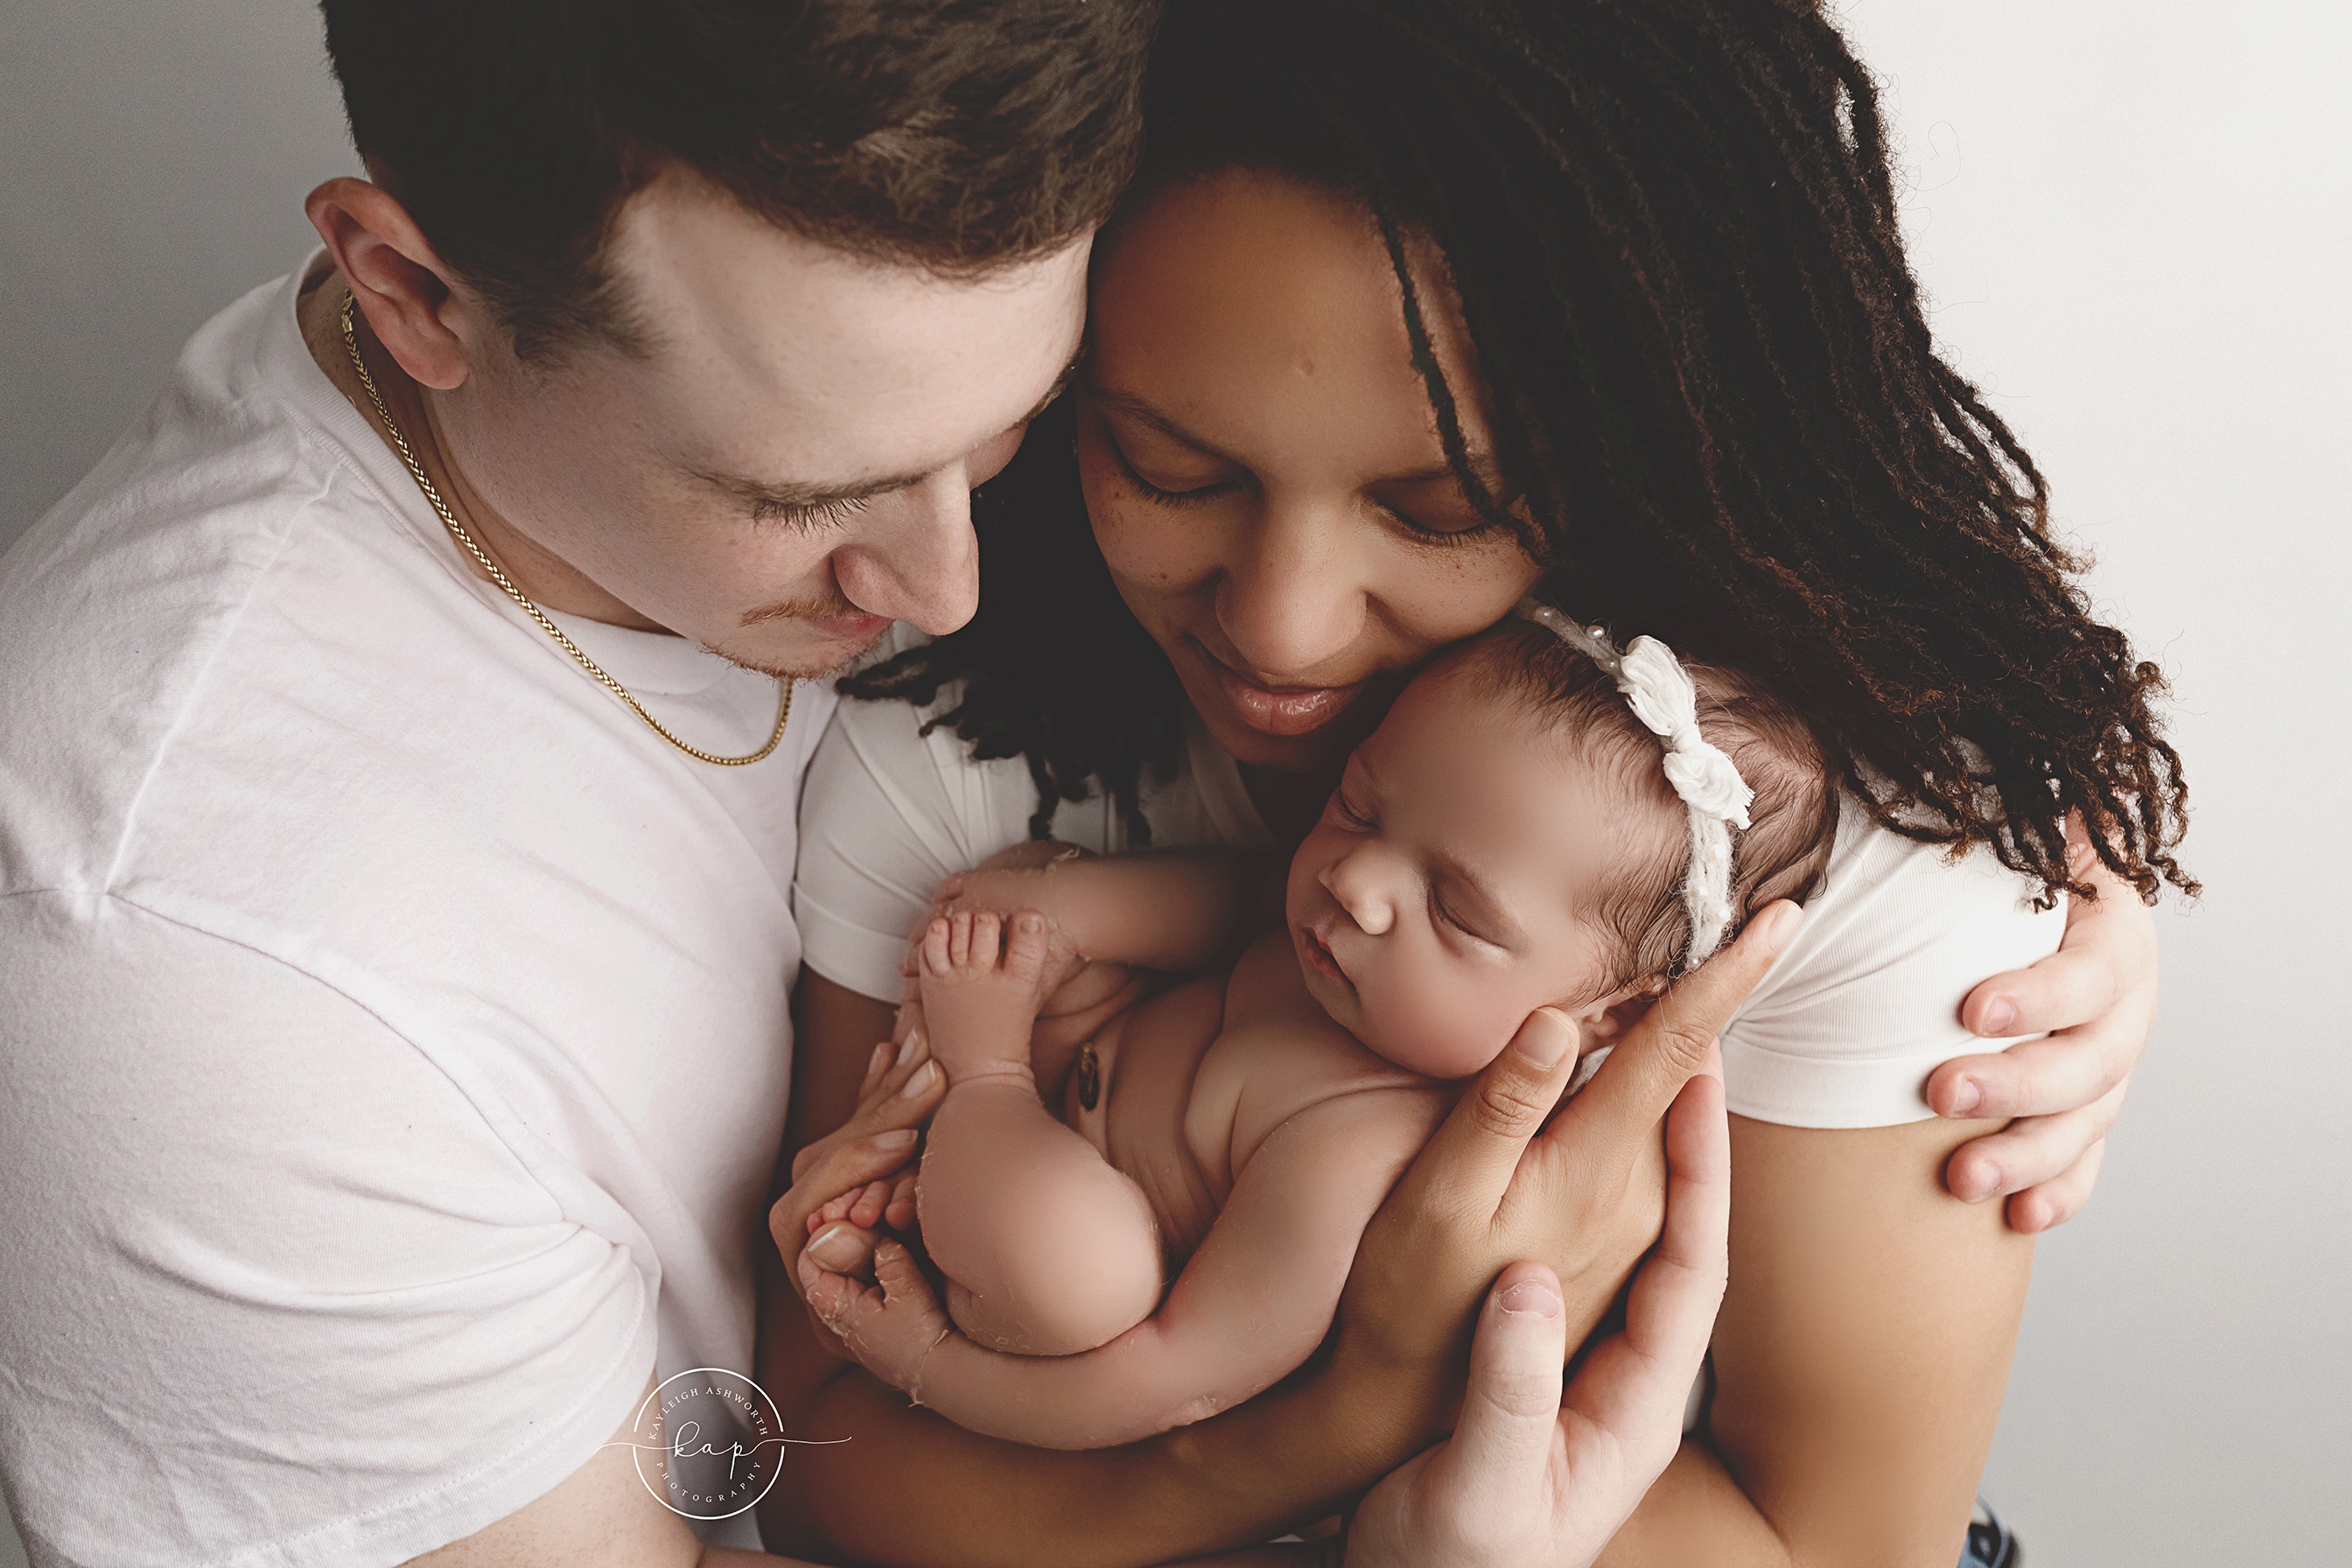 A family and newborn photo from Kayleigh Ashworth